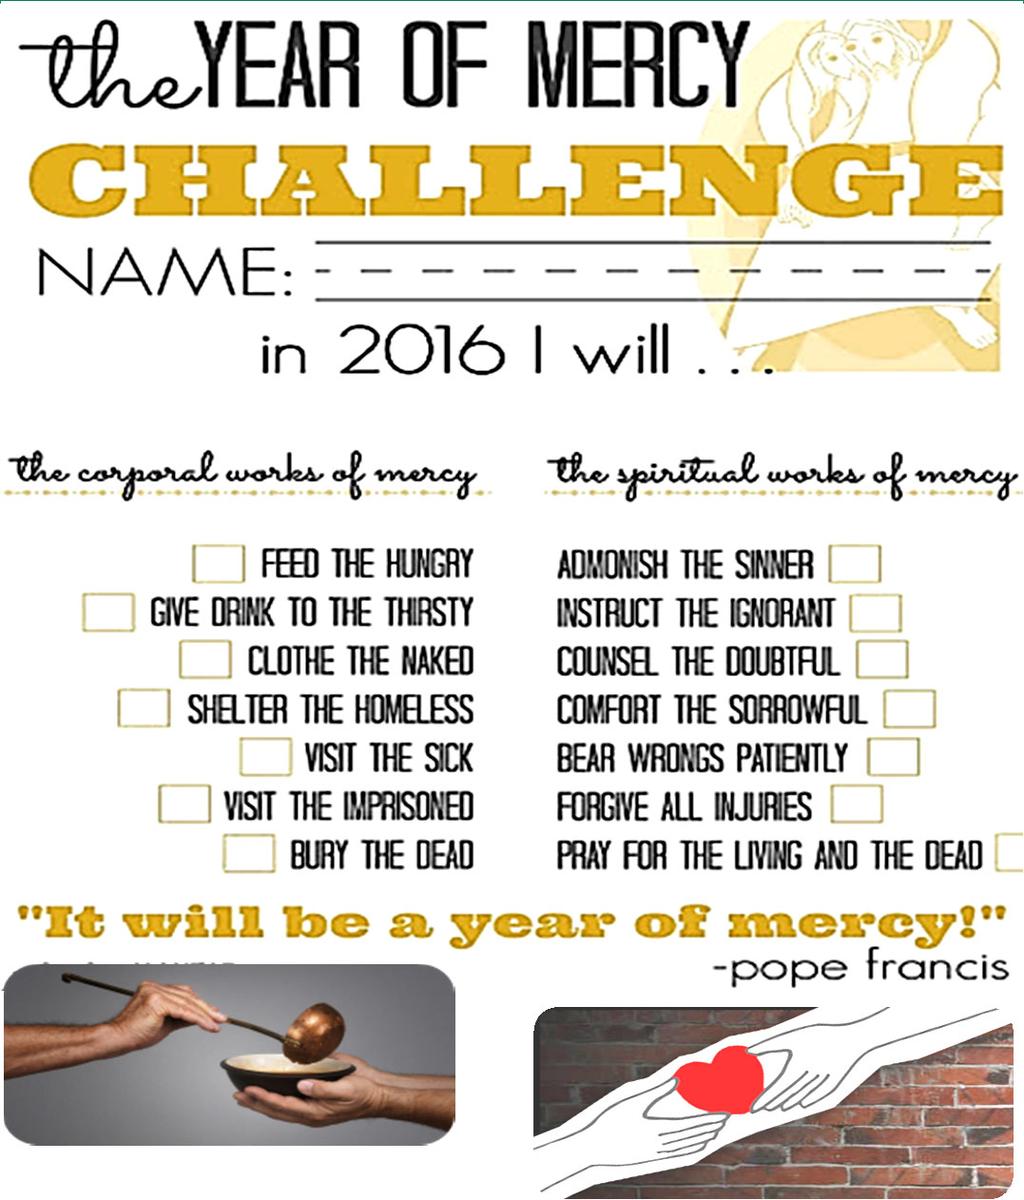 WE ARE ON OUR WAY TO THE 2ND HALF OF THE YEAR OF MERCY! Can you associate a Work of Mercy to the Saints below? 1.